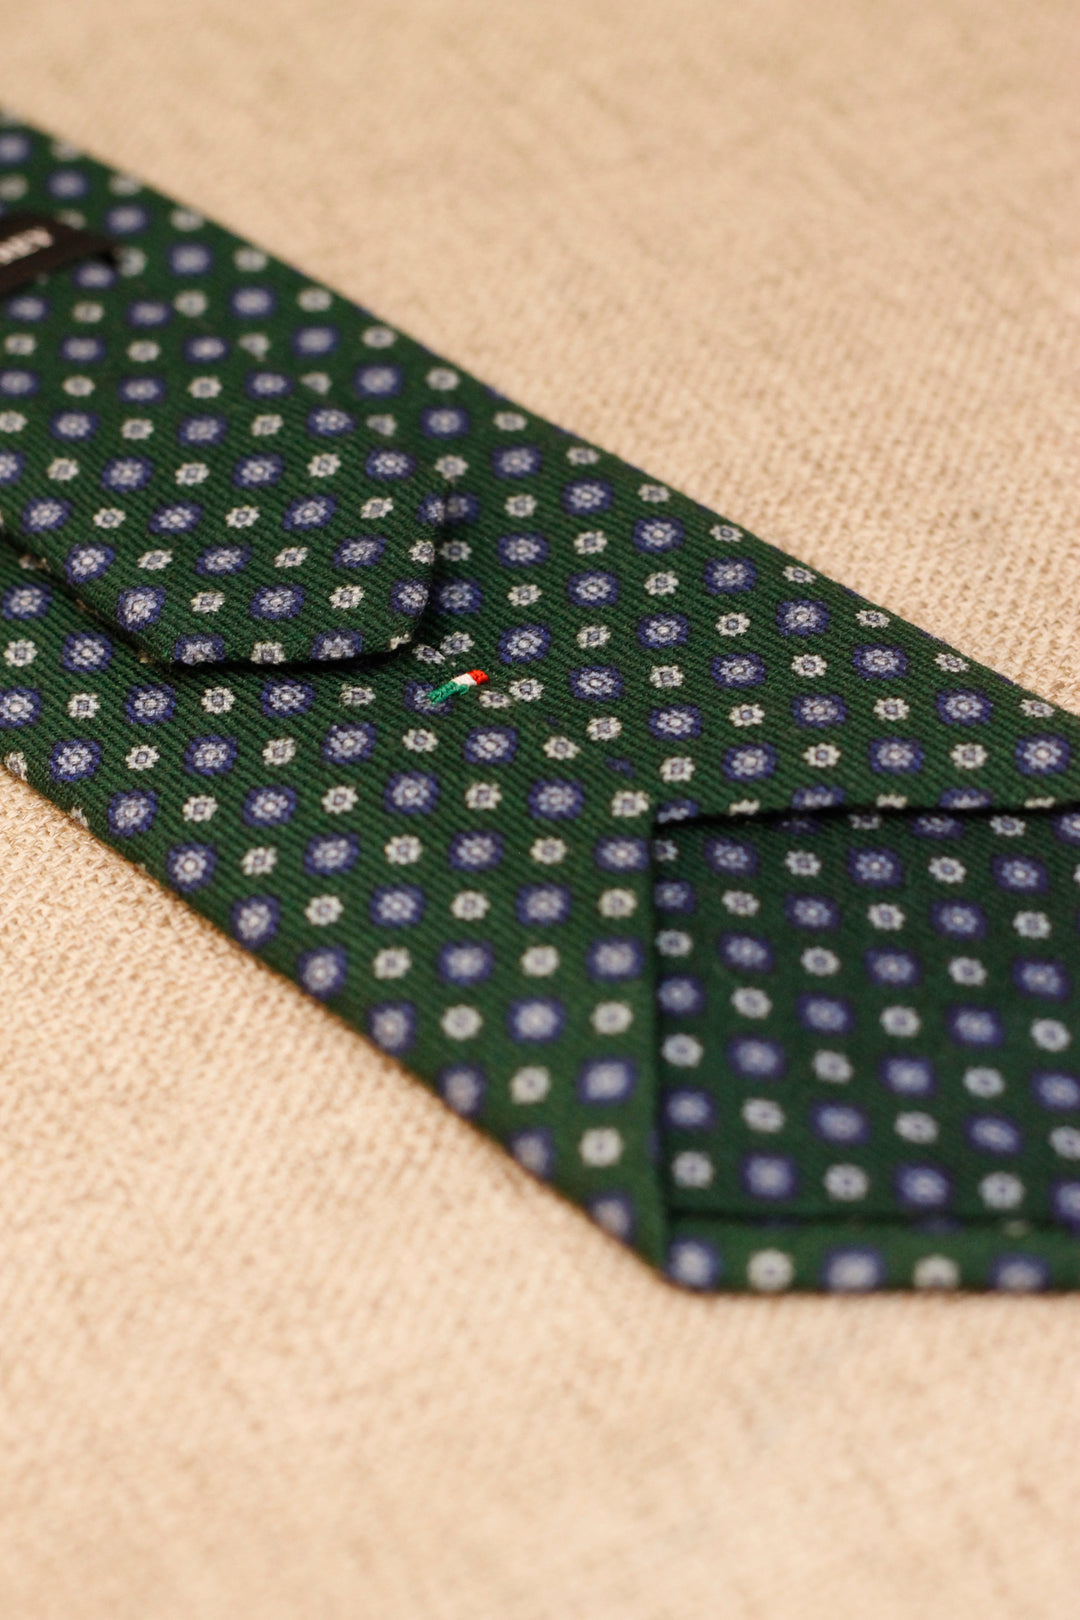 Napoli WOOL Green Tie with Blue Tone Daisies